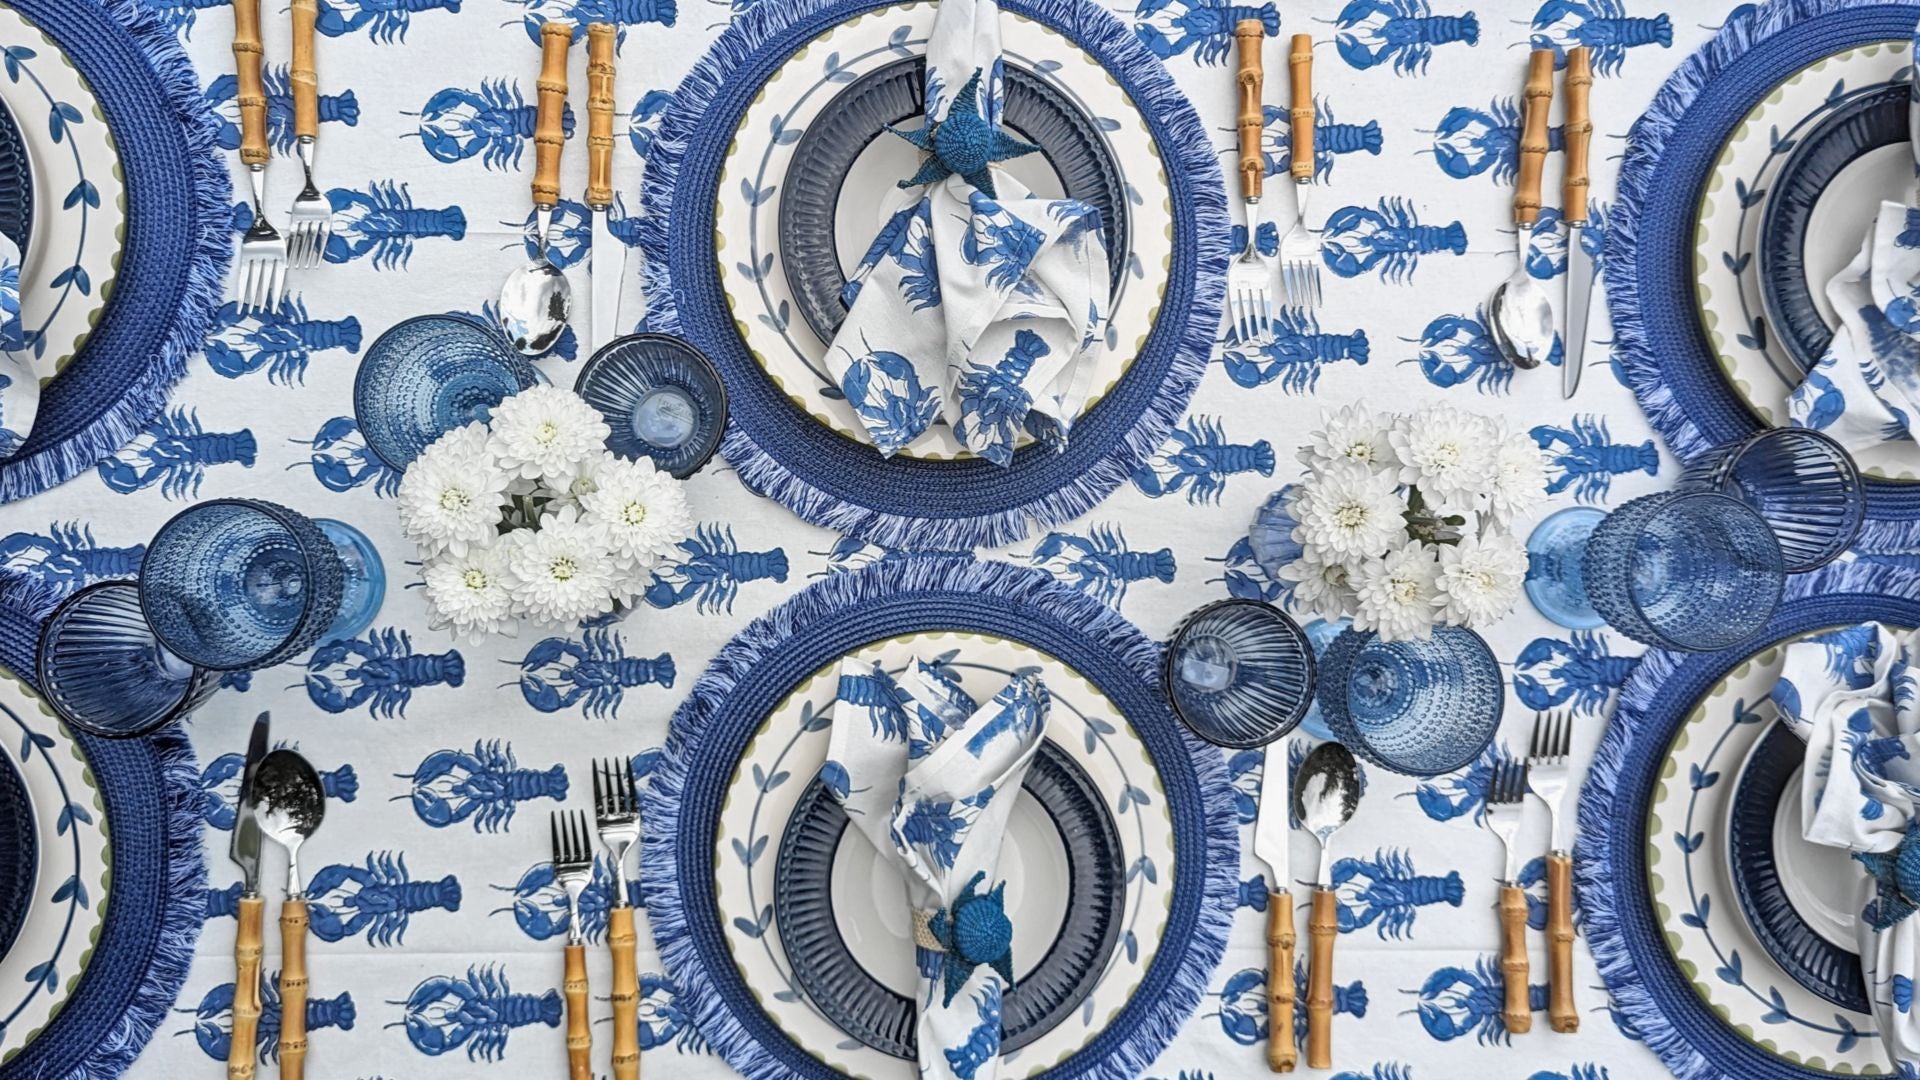 Tablecloths & Table Runners